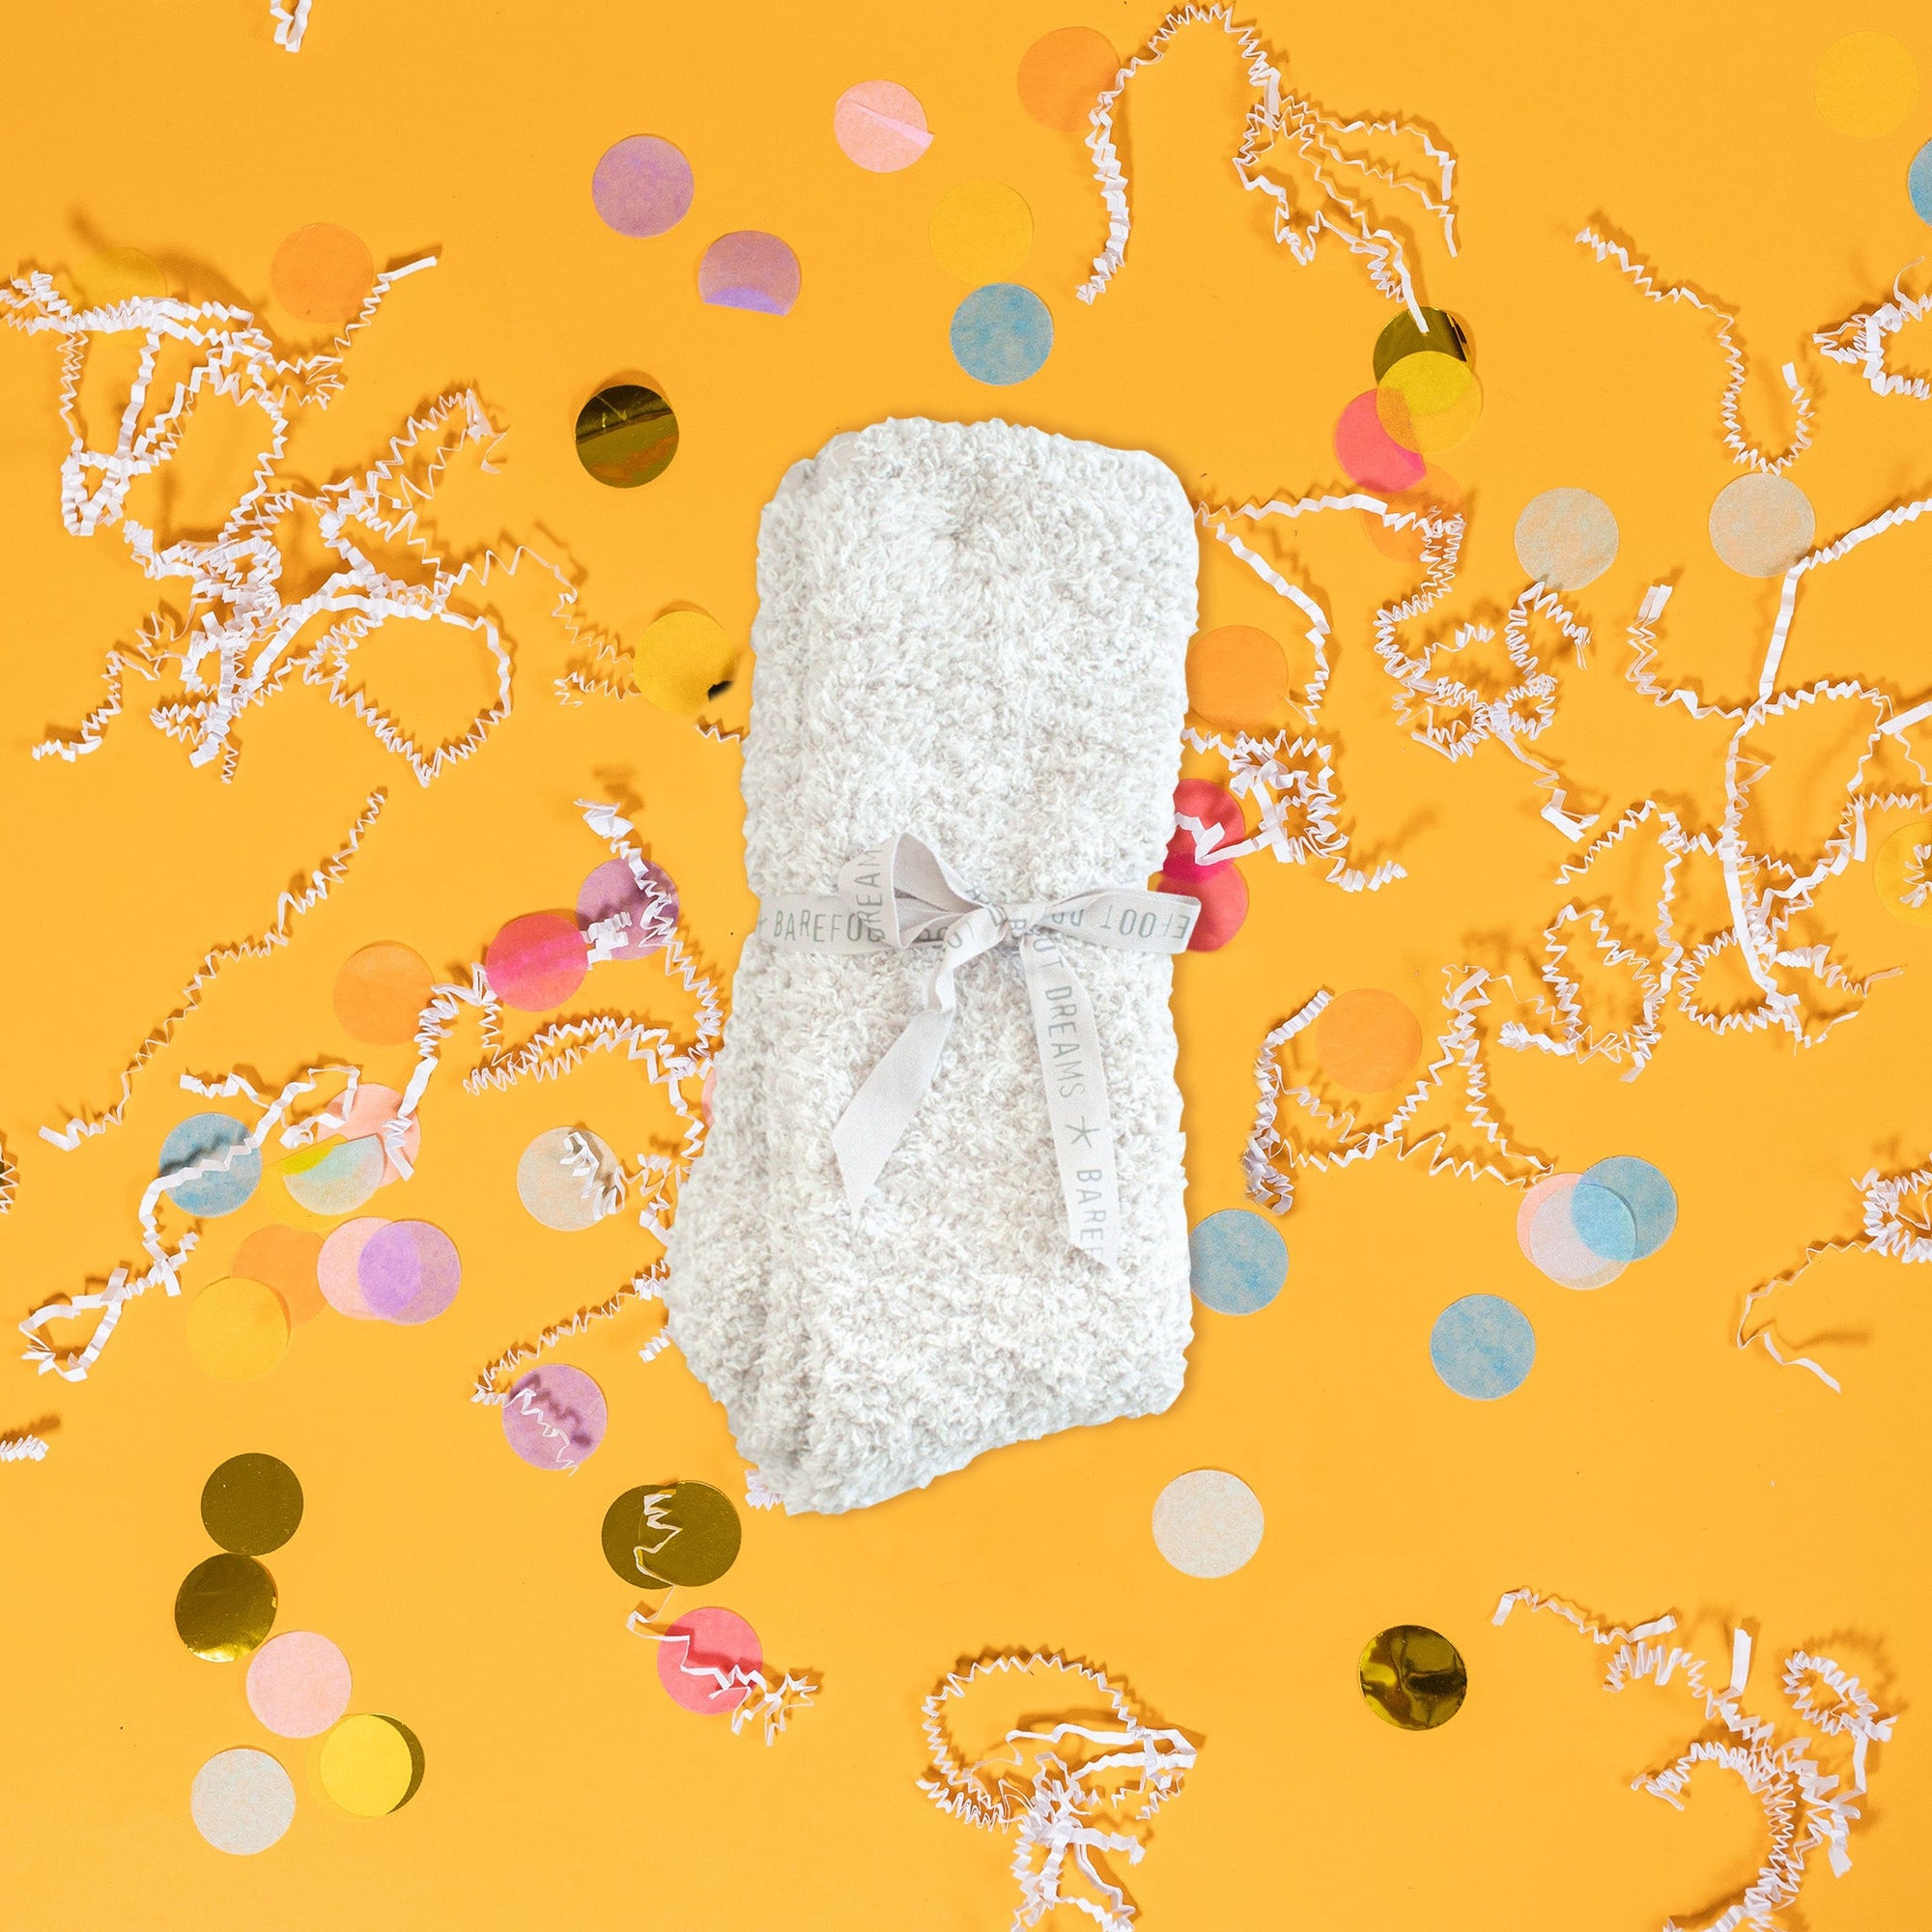 On a sunny mustard background sits a pair of socks folded and tied with a light stone ribbon that says "BAREFOOT DREAMS" repeatedly. These heathered socks are stone and white and so soft. There are white crinkle and big, colorful confetti scattered around.